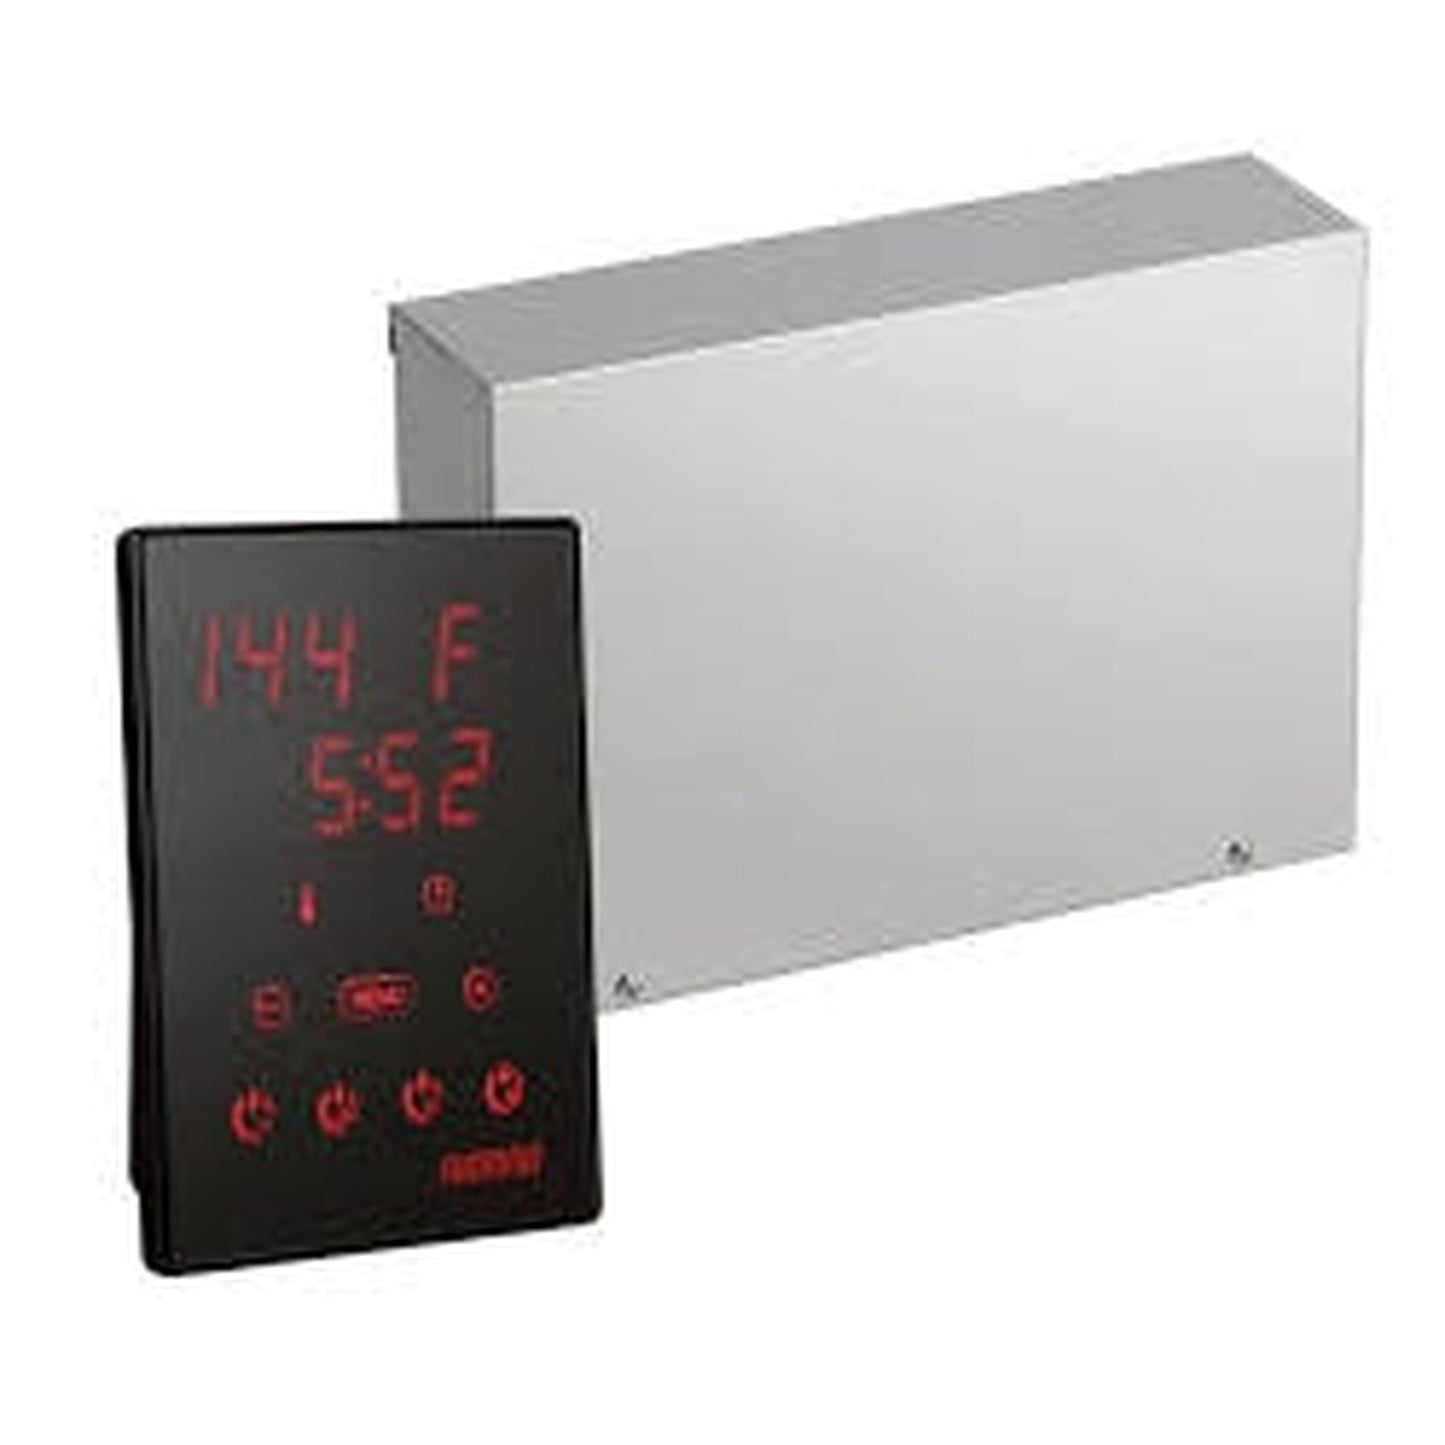 Harvia Xenio Wall Mount Digital Control For Combi 3 Phase Heaters in Black Finish